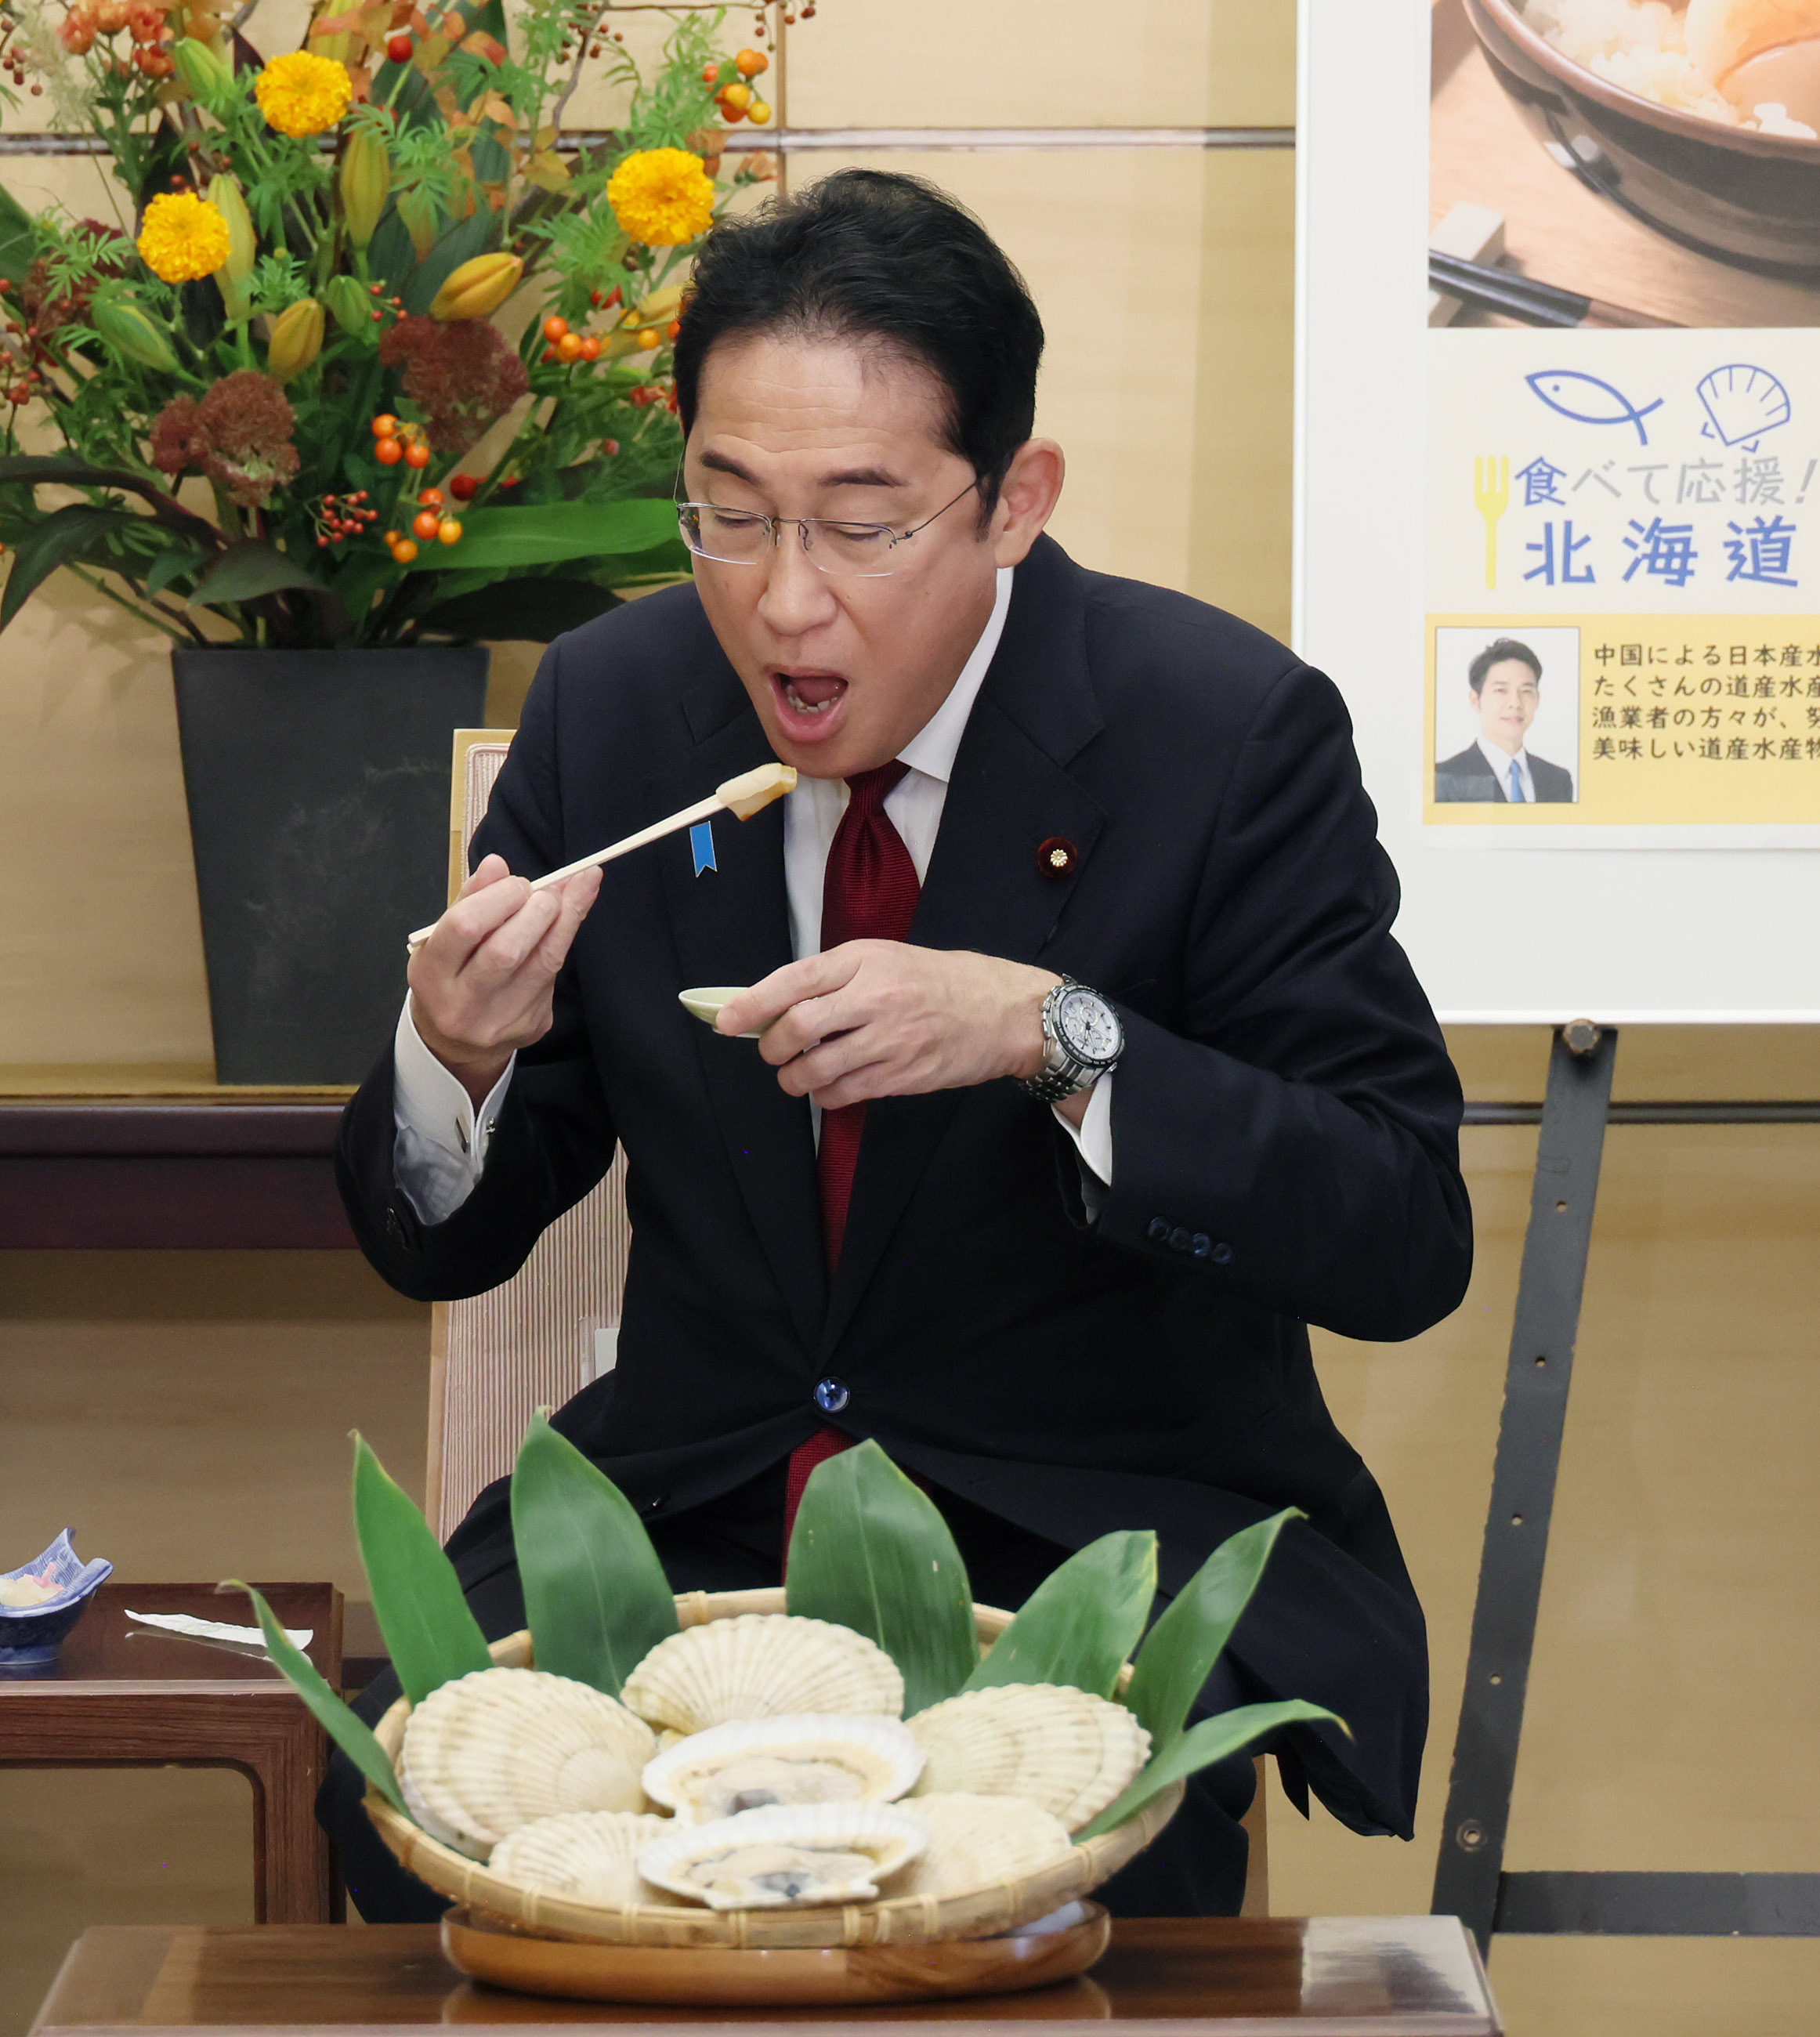 Prime Minister Kishida being presented with scallops (2)